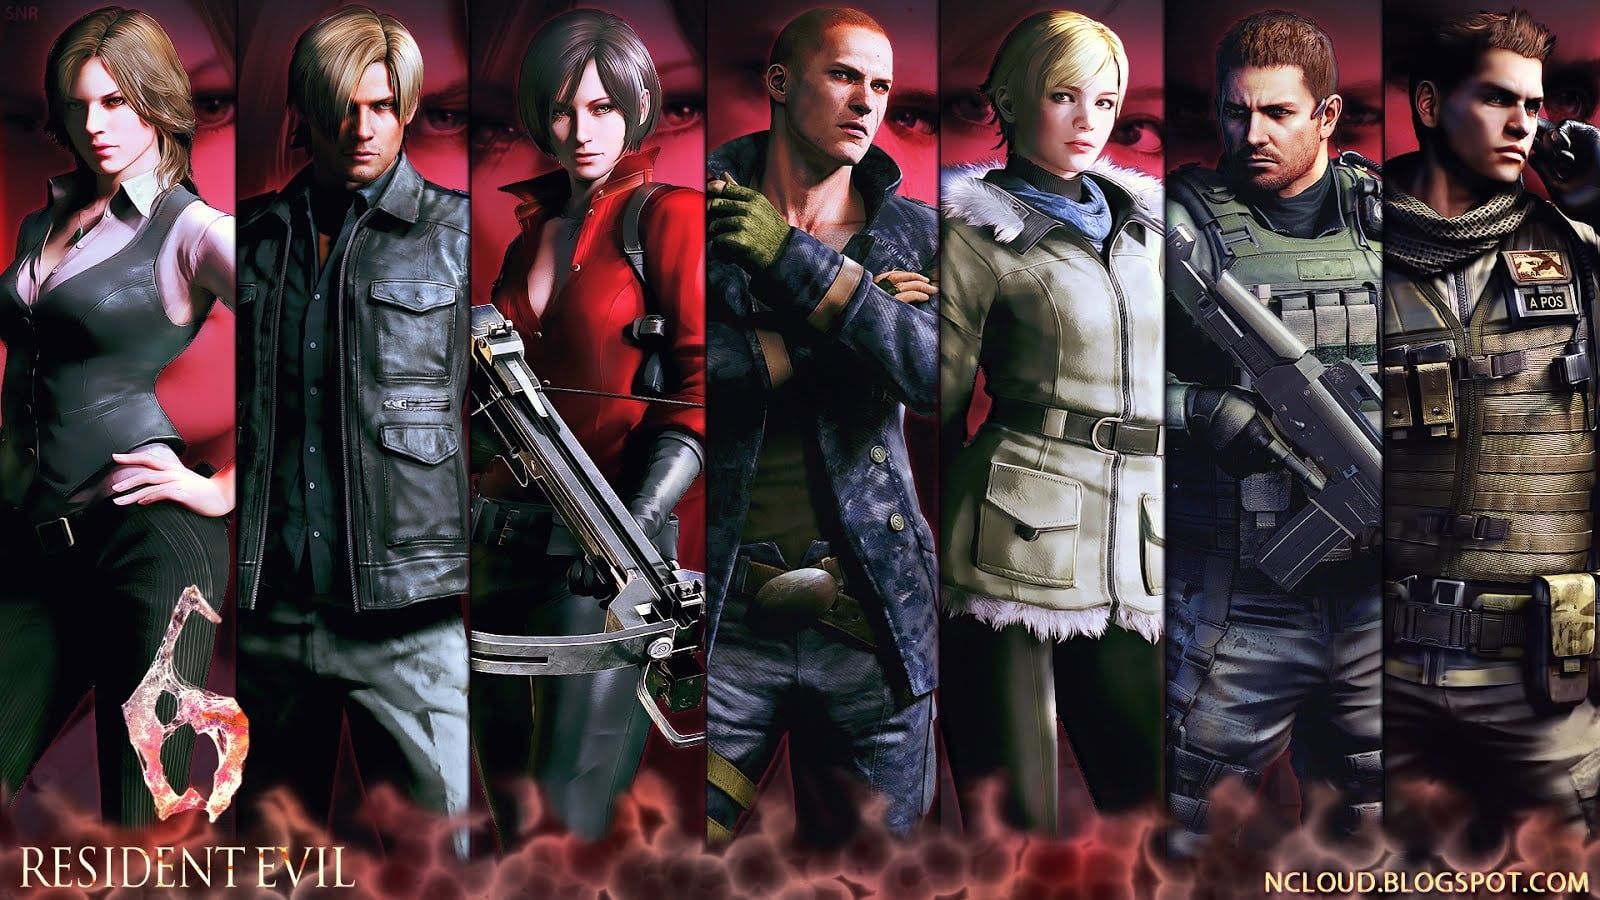 Resident Evil Posters, Video Games, Epica, Resident